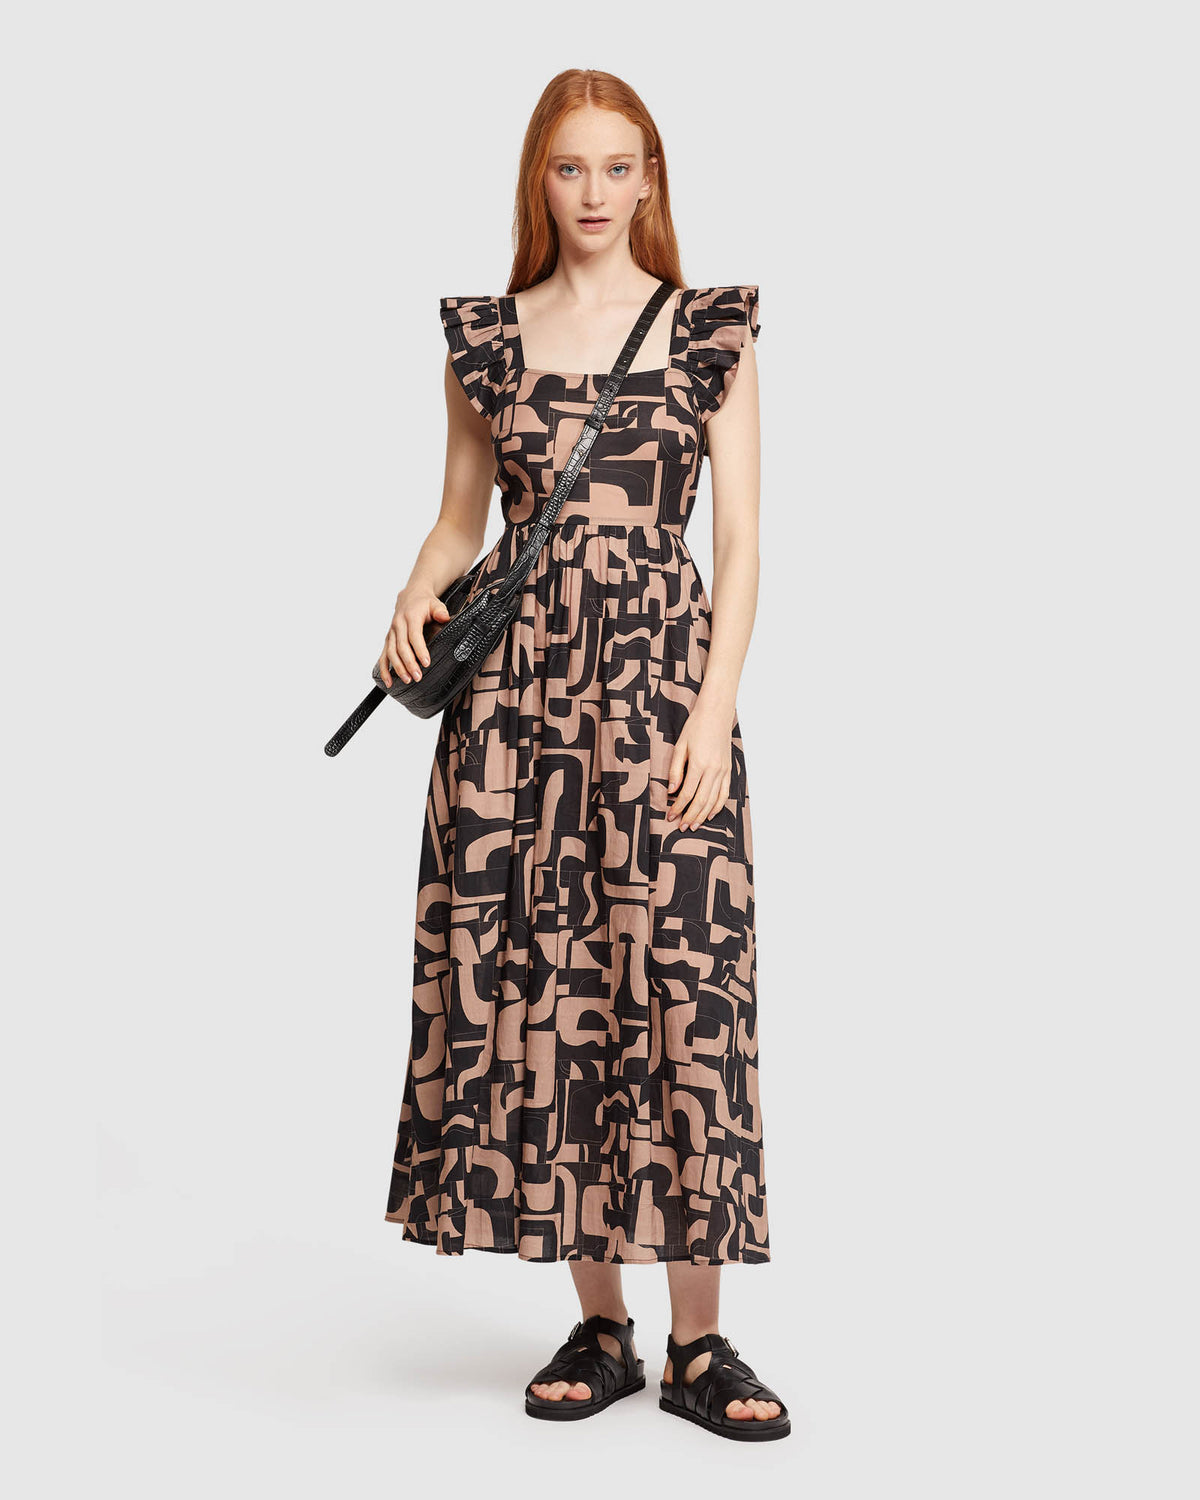 ANNIE GEO PRINT VOILE DRESS - AVAILABLE ~ 1-2 weeks WOMENS DRESSES